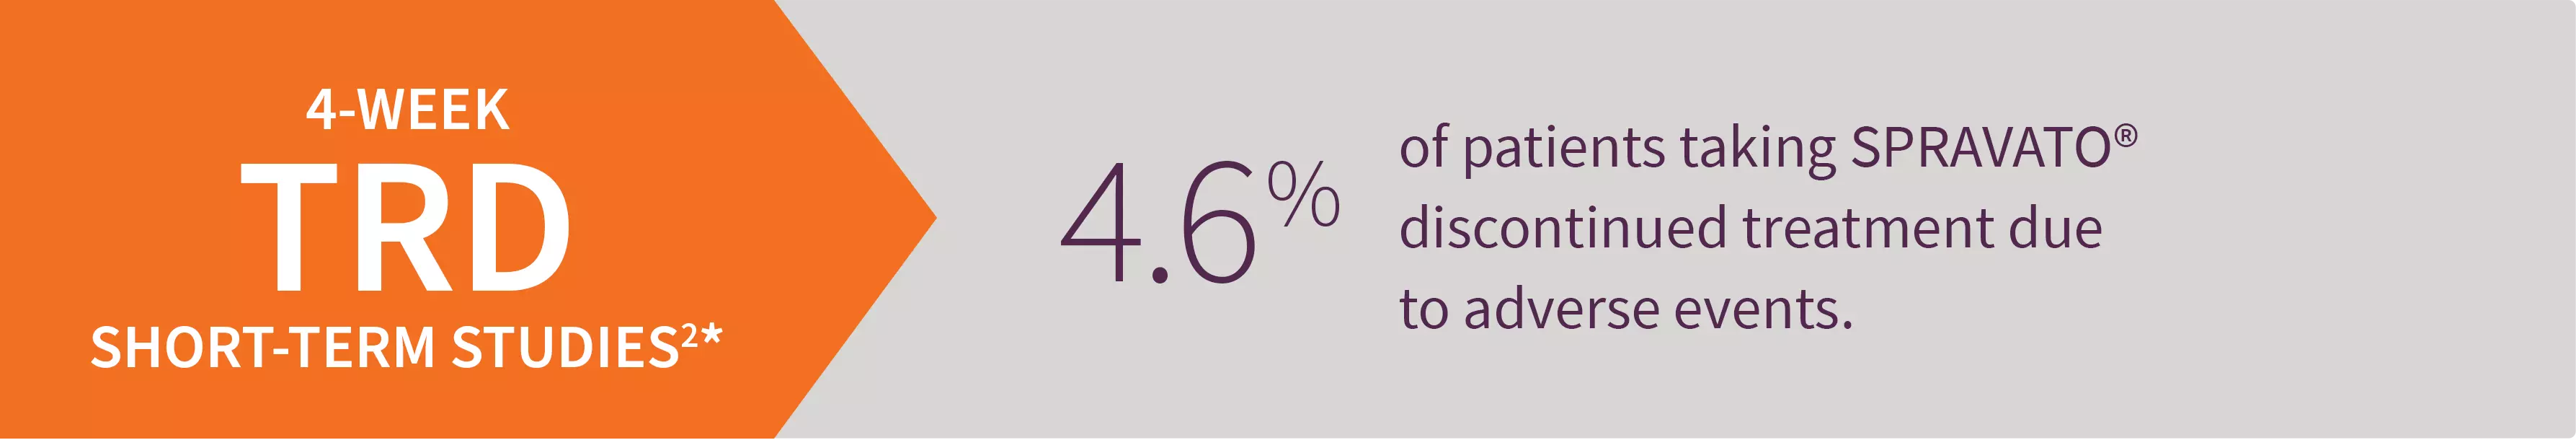 Percentage of patients taking SPRAVATO® who discontinued treatment due to adverse events